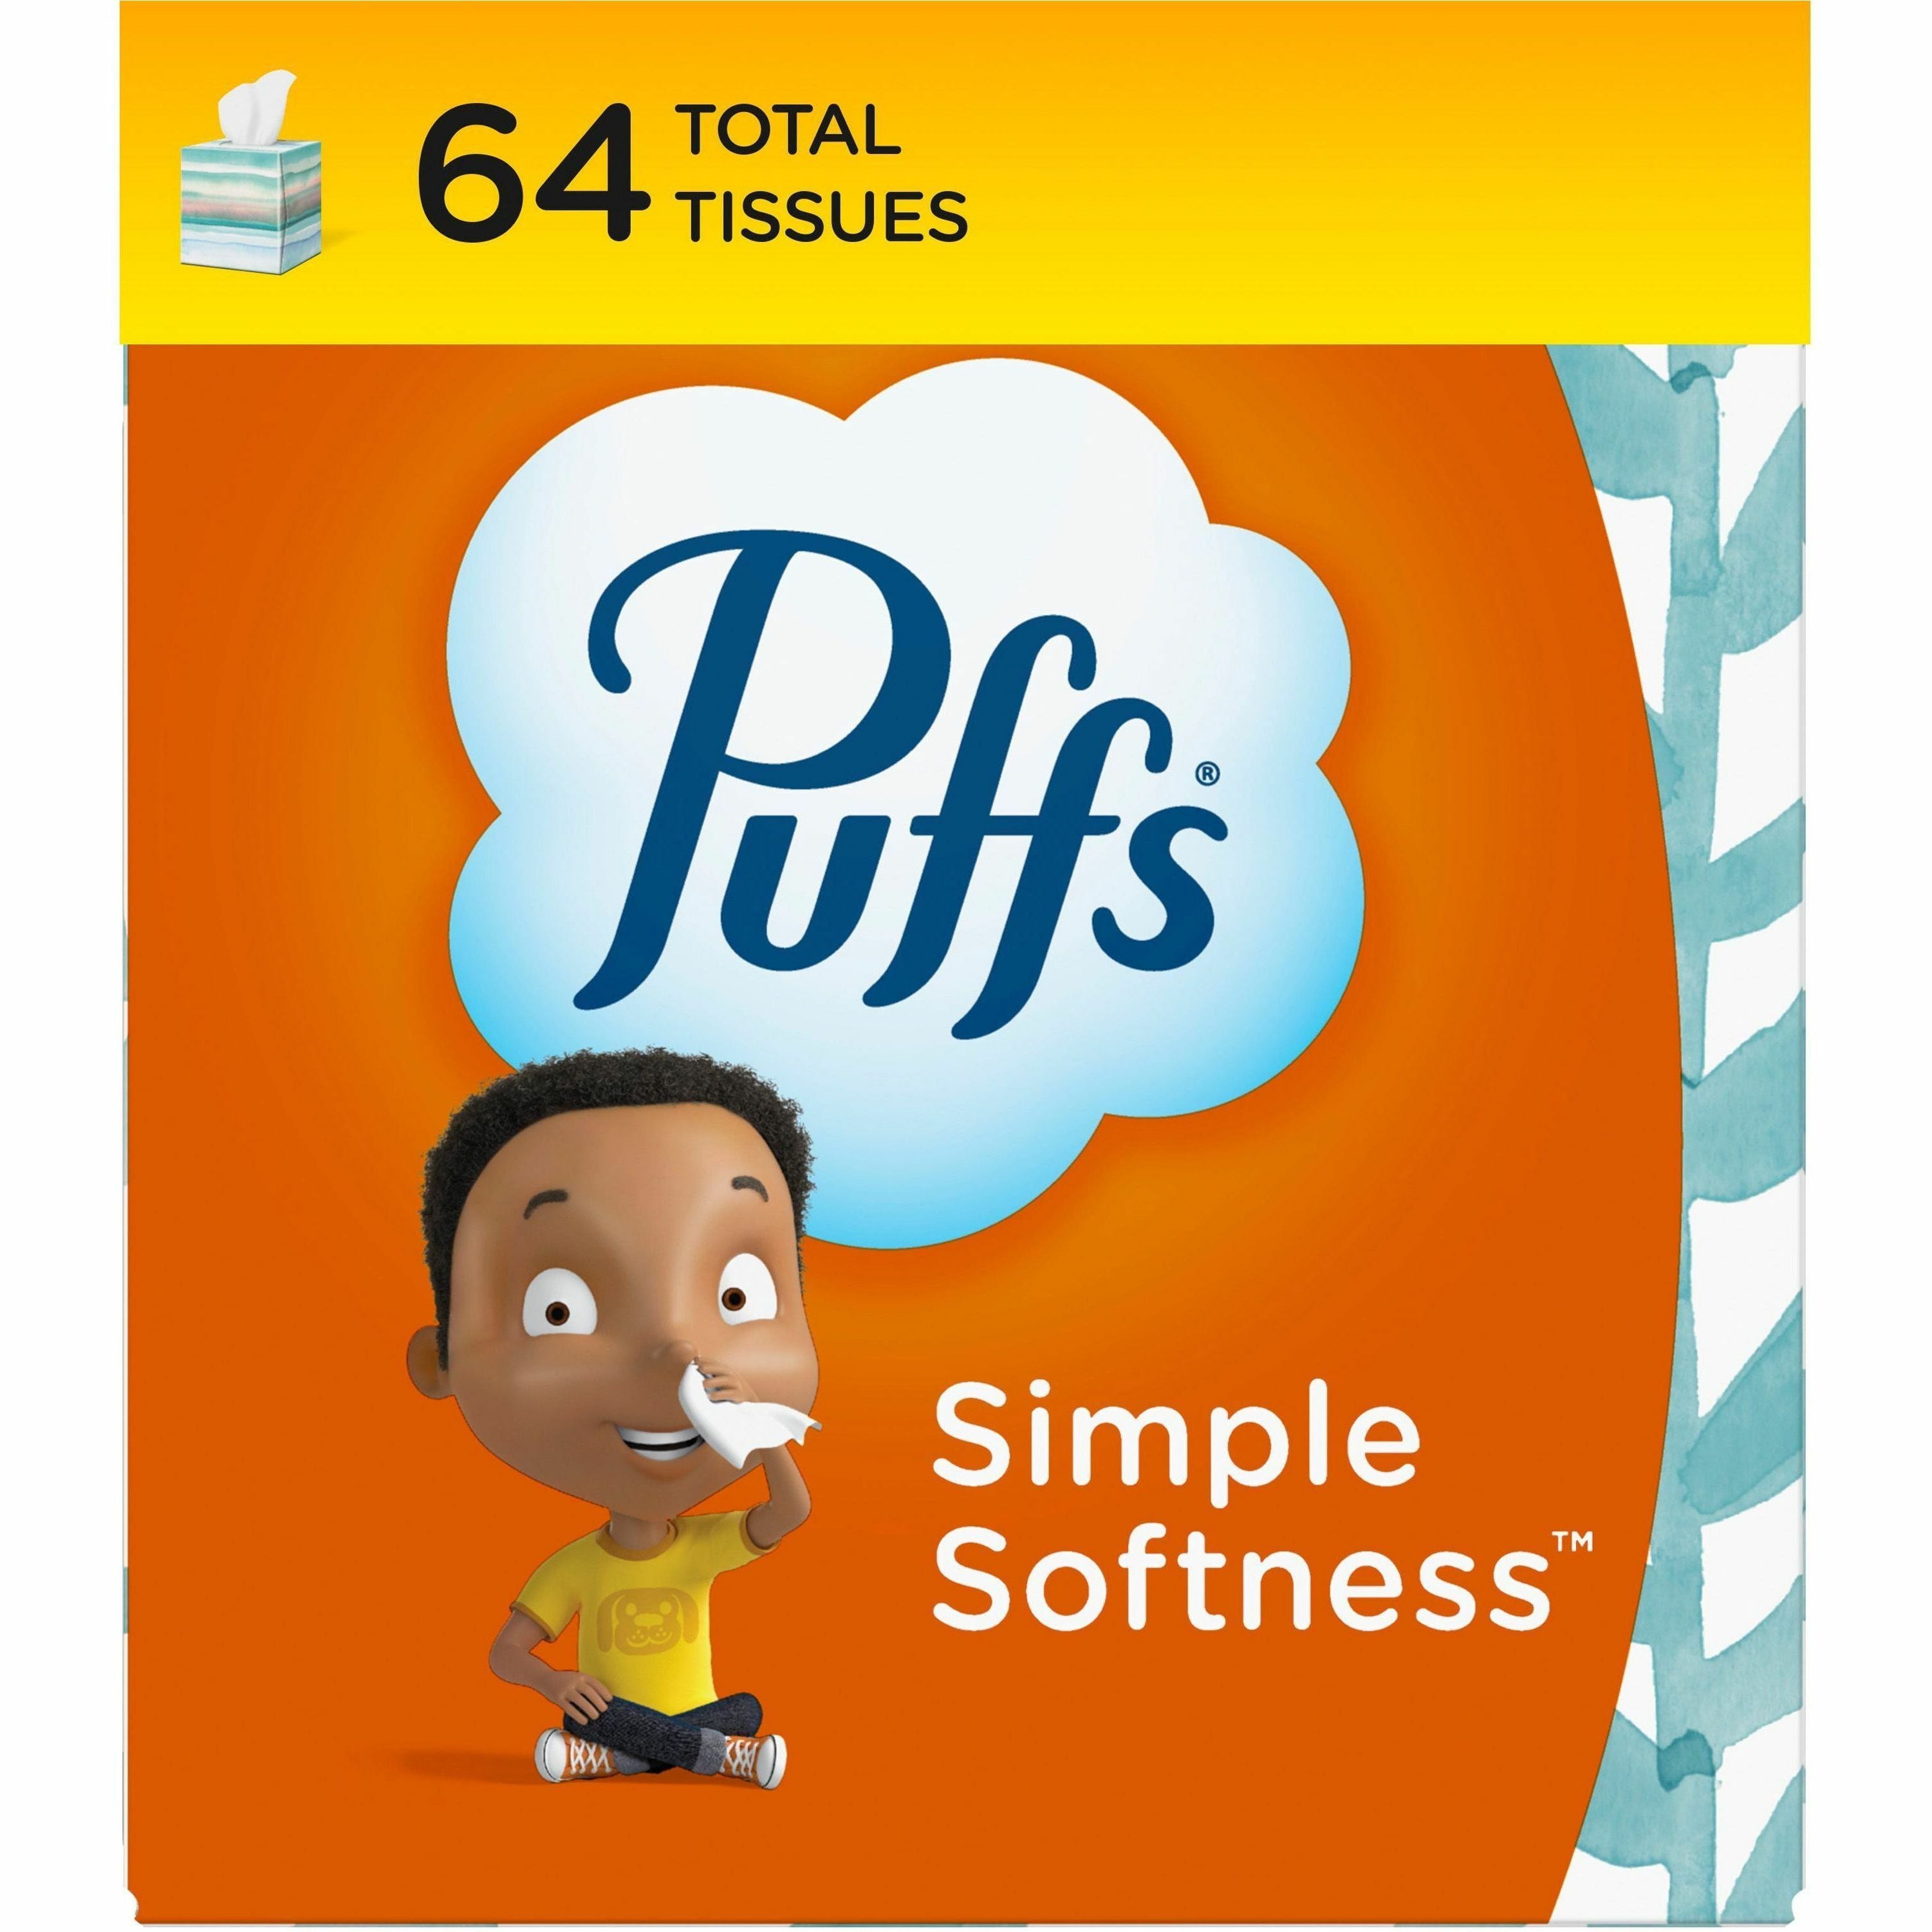 puffs-basic-facial-tissue-2-ply-840-x-820-white-soft-comfortable-allergen-free-durable-strong-lotion-free-fragrance-free-for-room-skin-home-skin-64-per-box-24-carton_pgc84405ct - 2